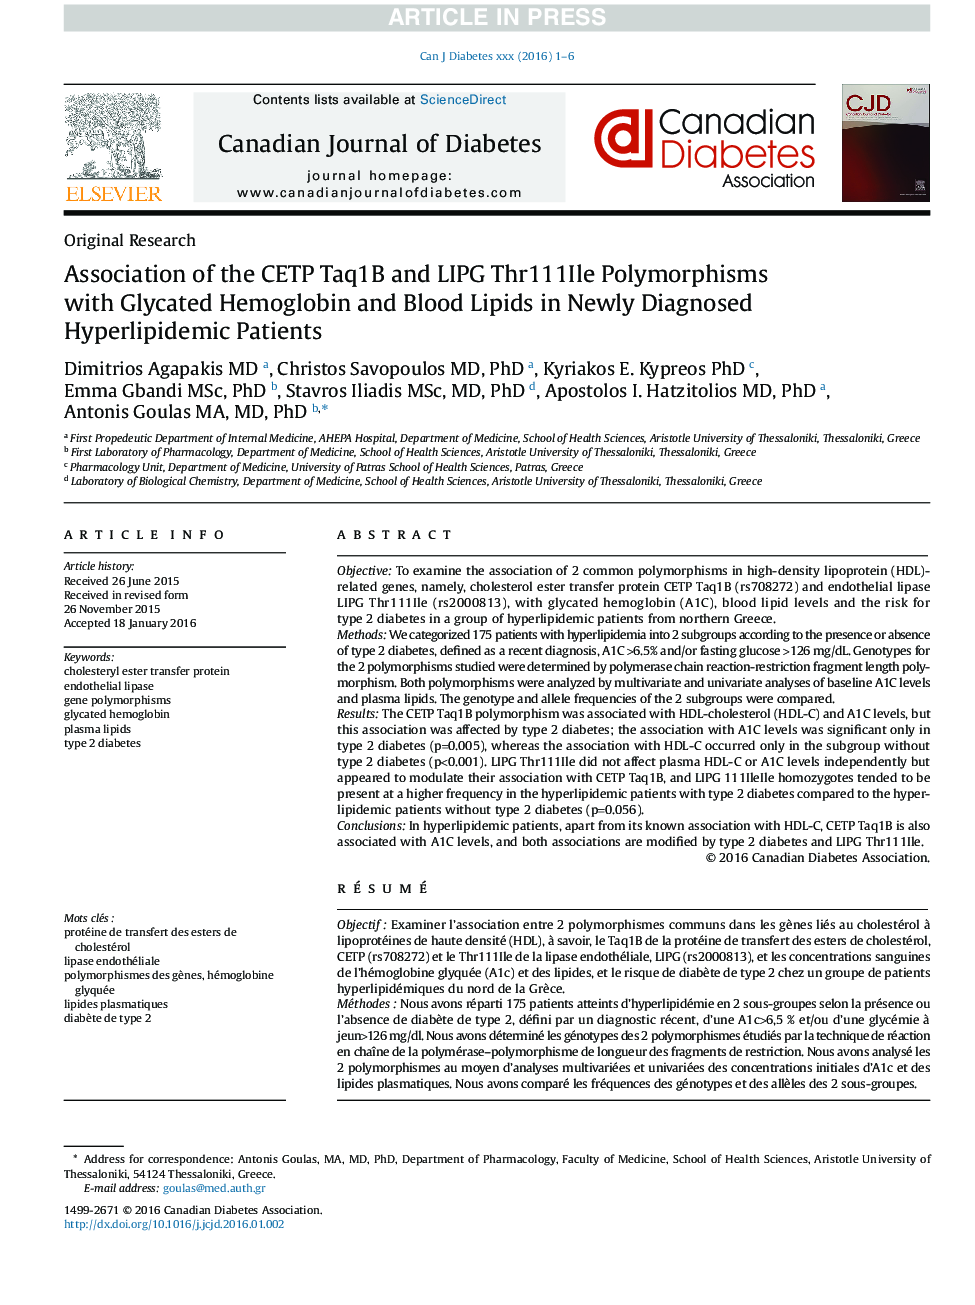 Association of the CETP Taq1B and LIPG Thr111Ile Polymorphisms with Glycated Hemoglobin and Blood Lipids in Newly Diagnosed Hyperlipidemic Patients